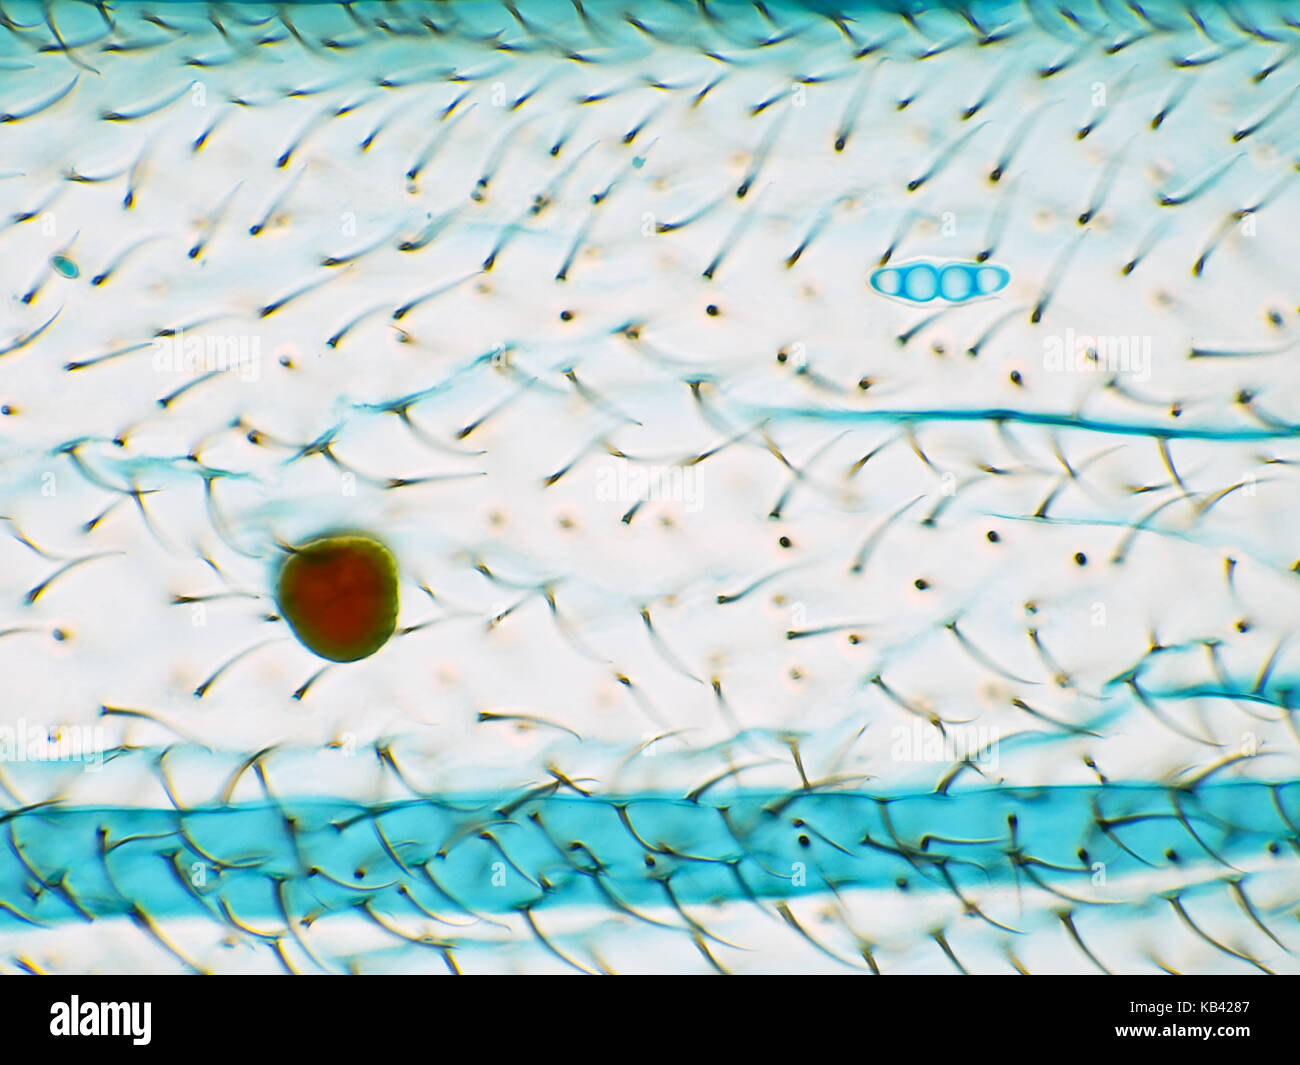 Bright field light micrograph of an insect wing mounted in lactophenol cotton blue, with a plant pollen grain and a fungal spore Stock Photo